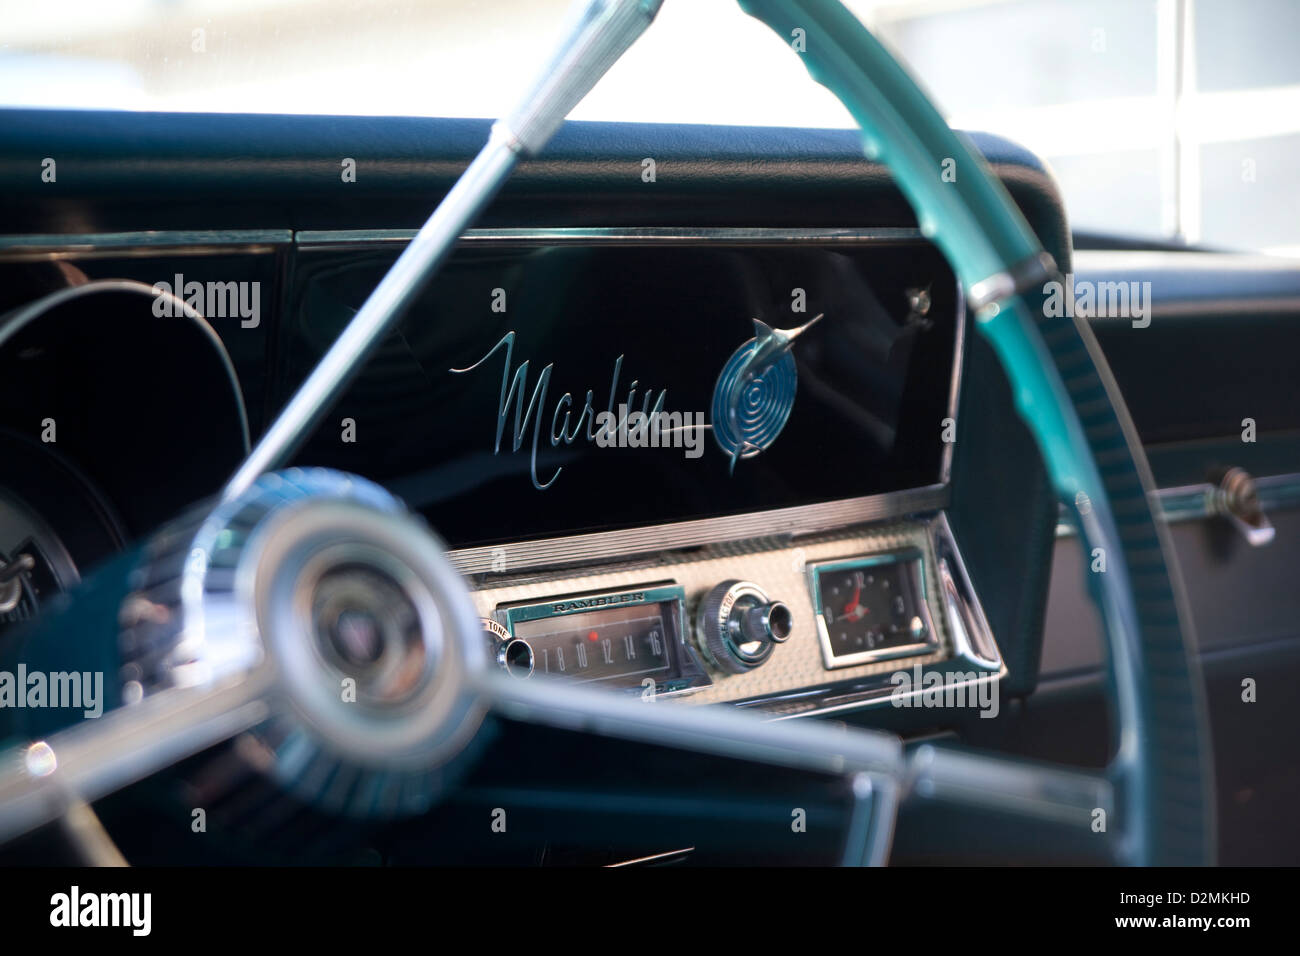 Dash of an old car, a Rambler Marlin from the 1960's Stock Photo